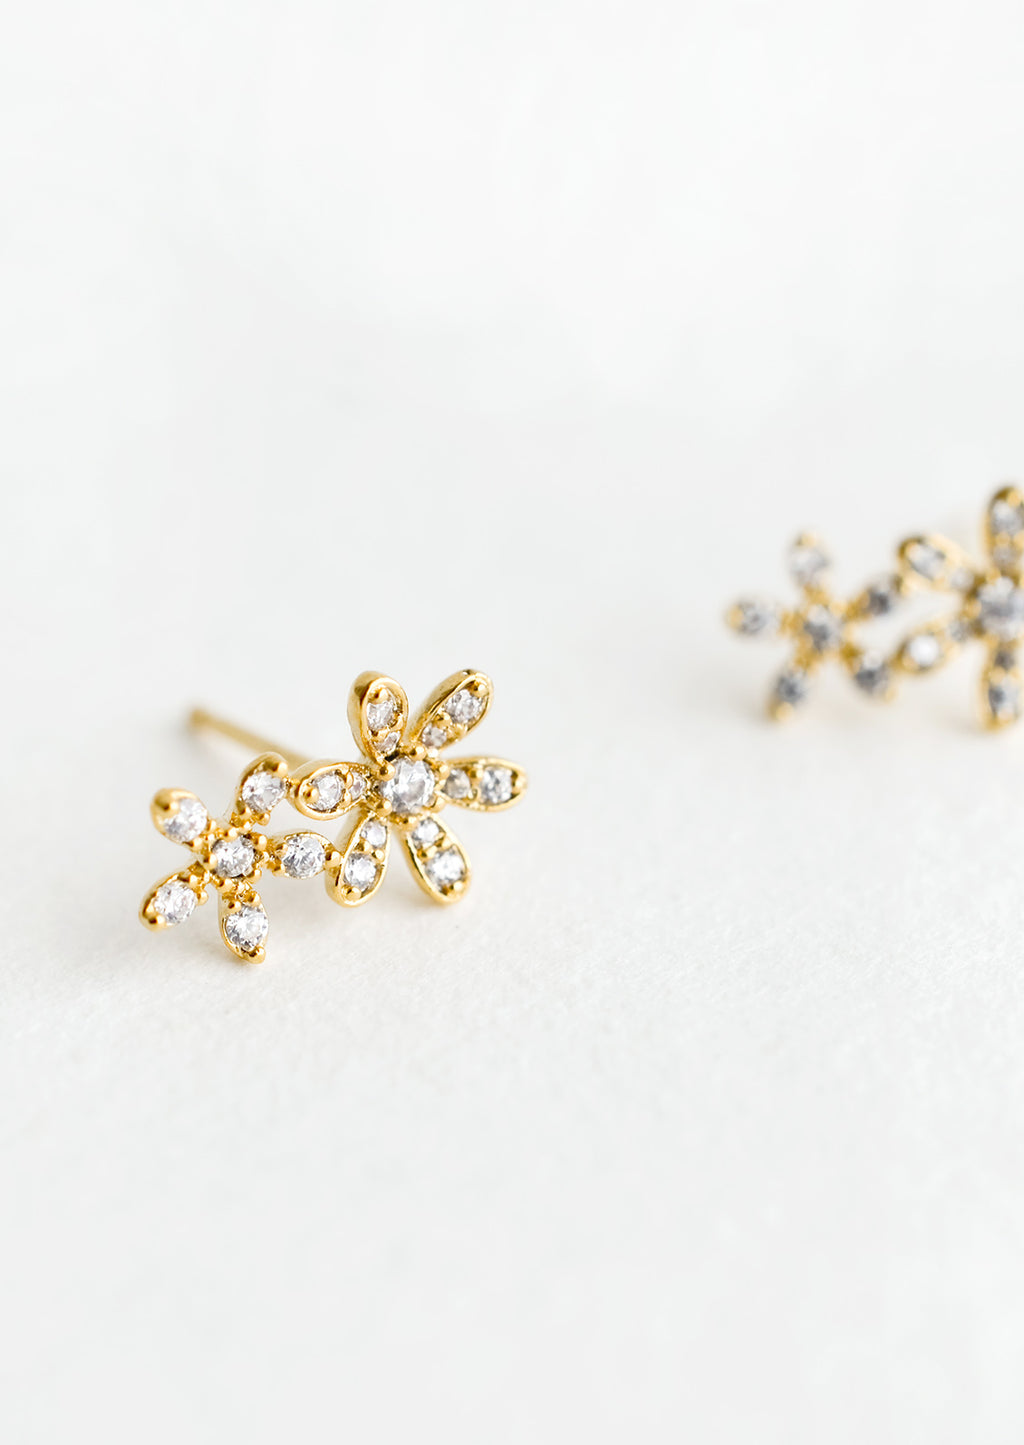 2: A pair of gold stud earrings in a two flower silhouette with clear crystal detailing.